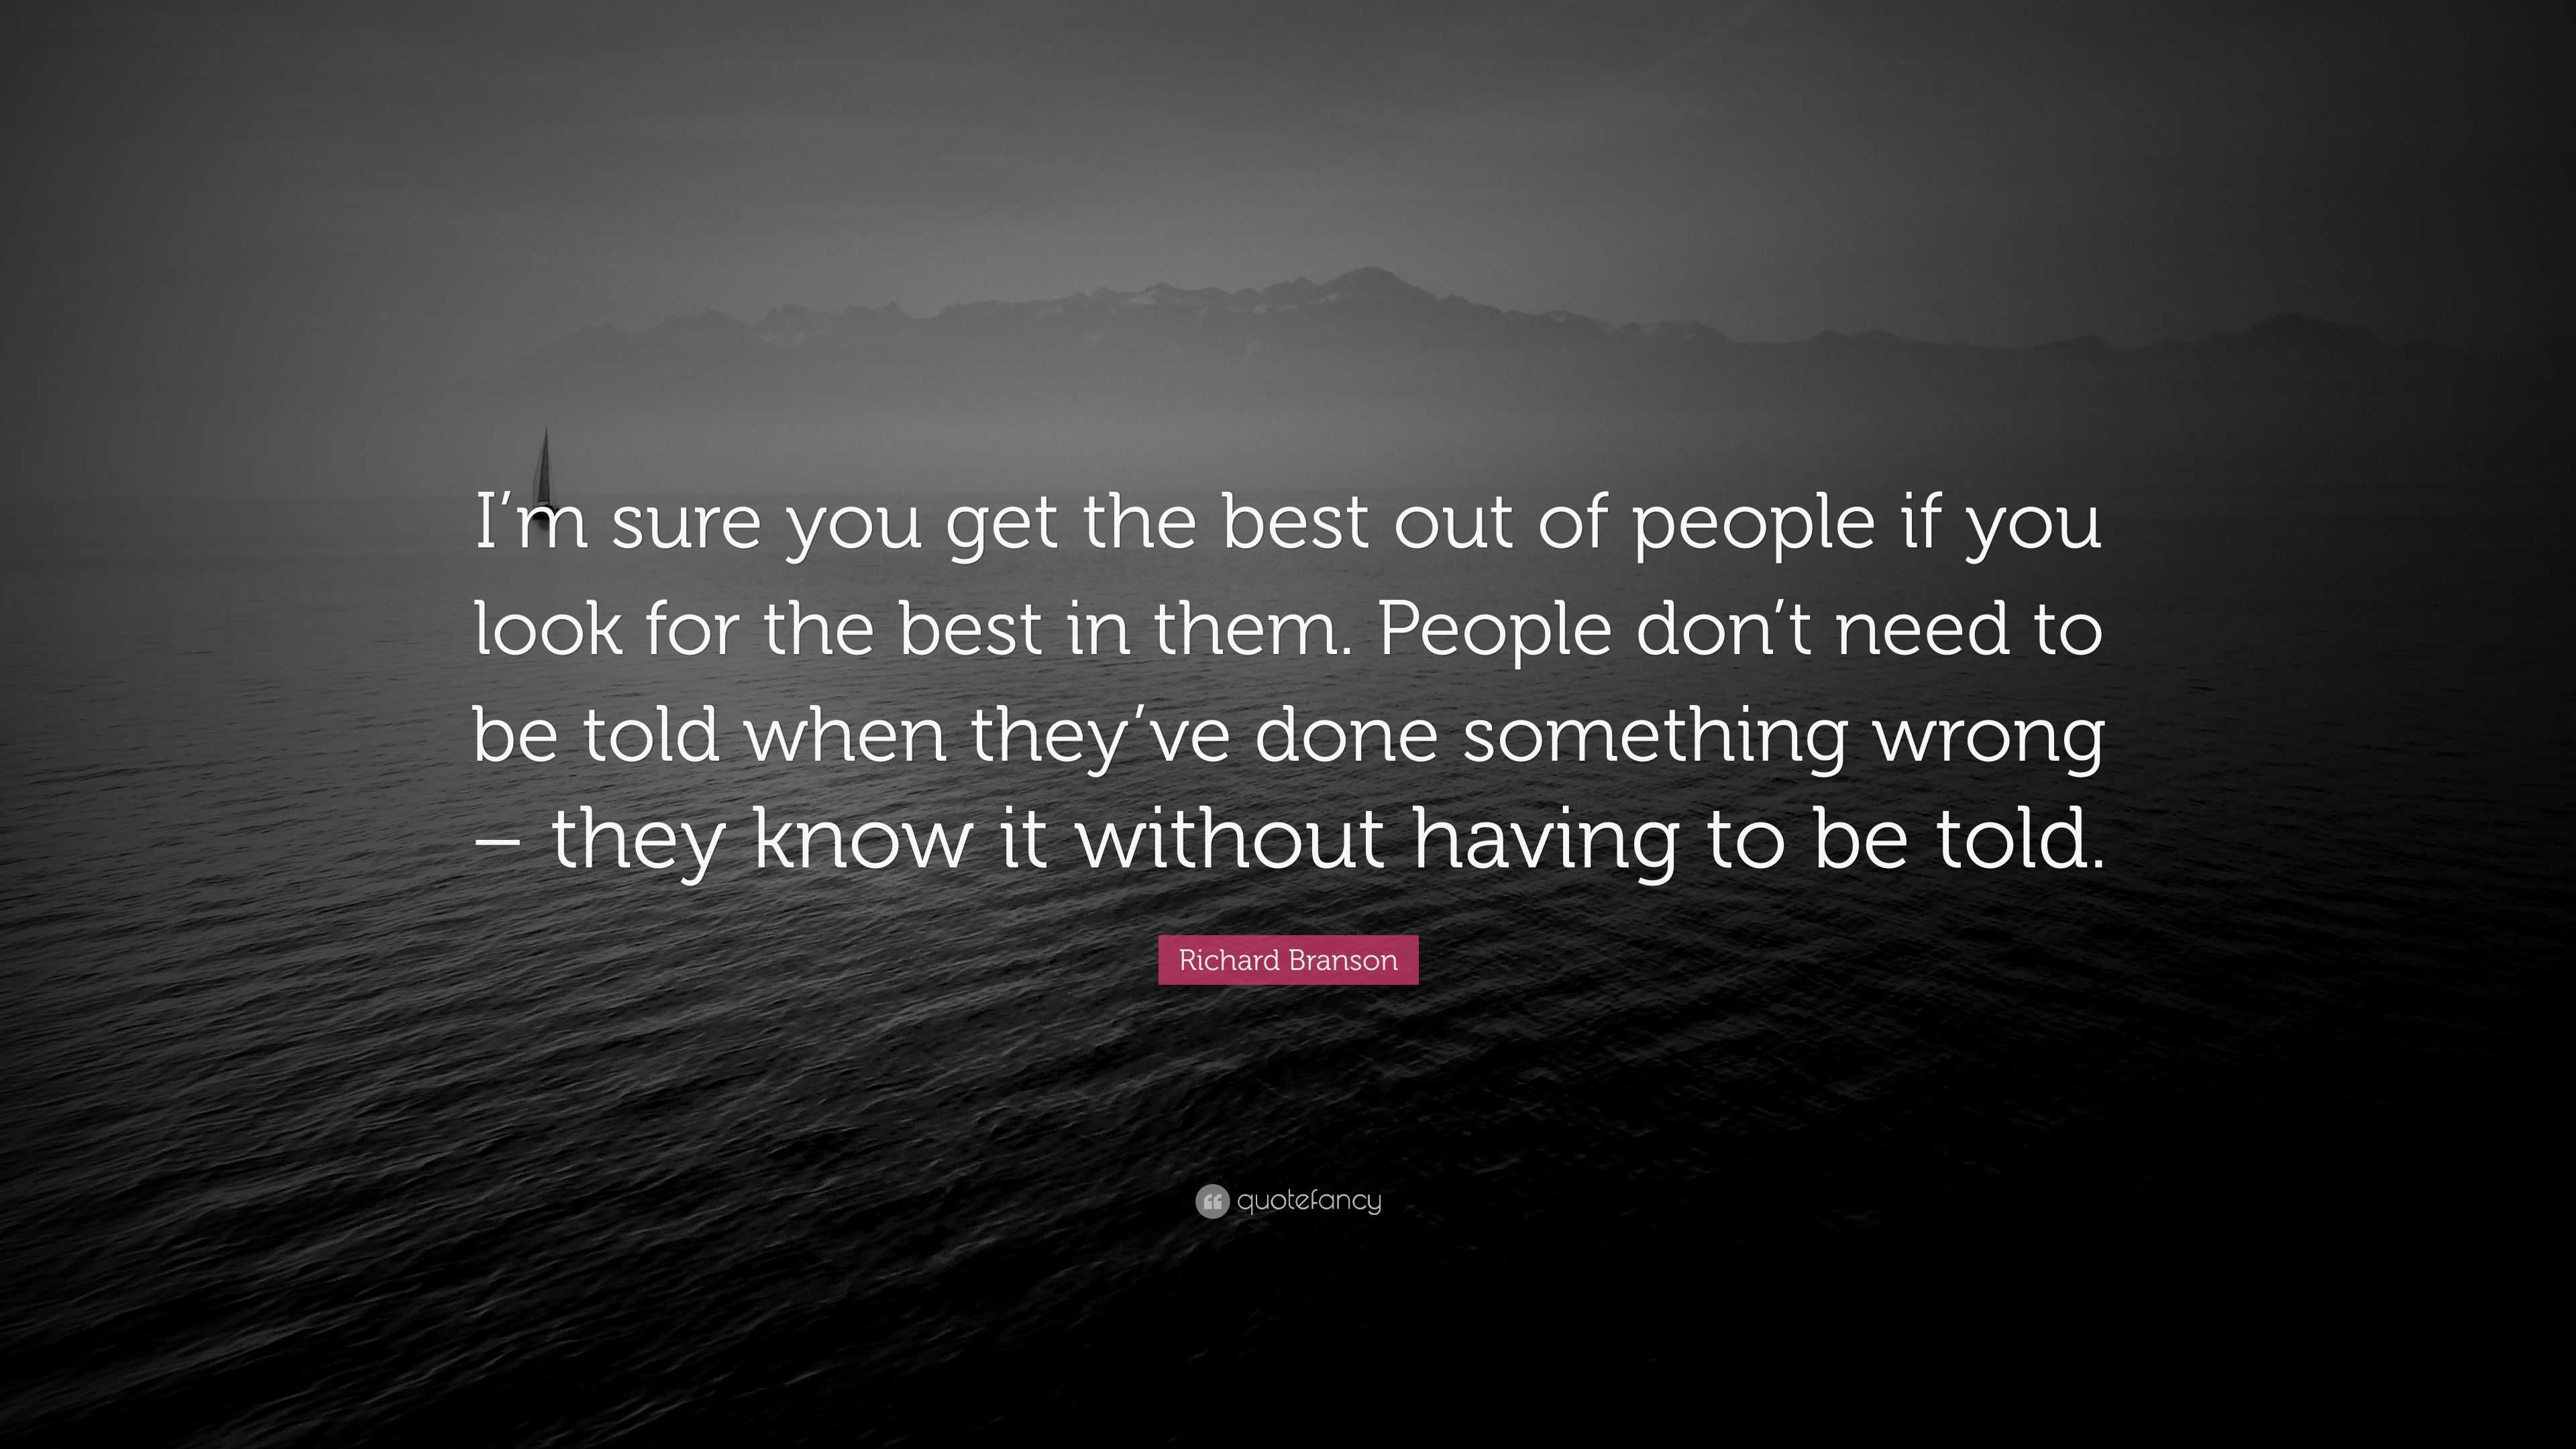 Richard Branson Quote: “I’m sure you get the best out of people if you ...